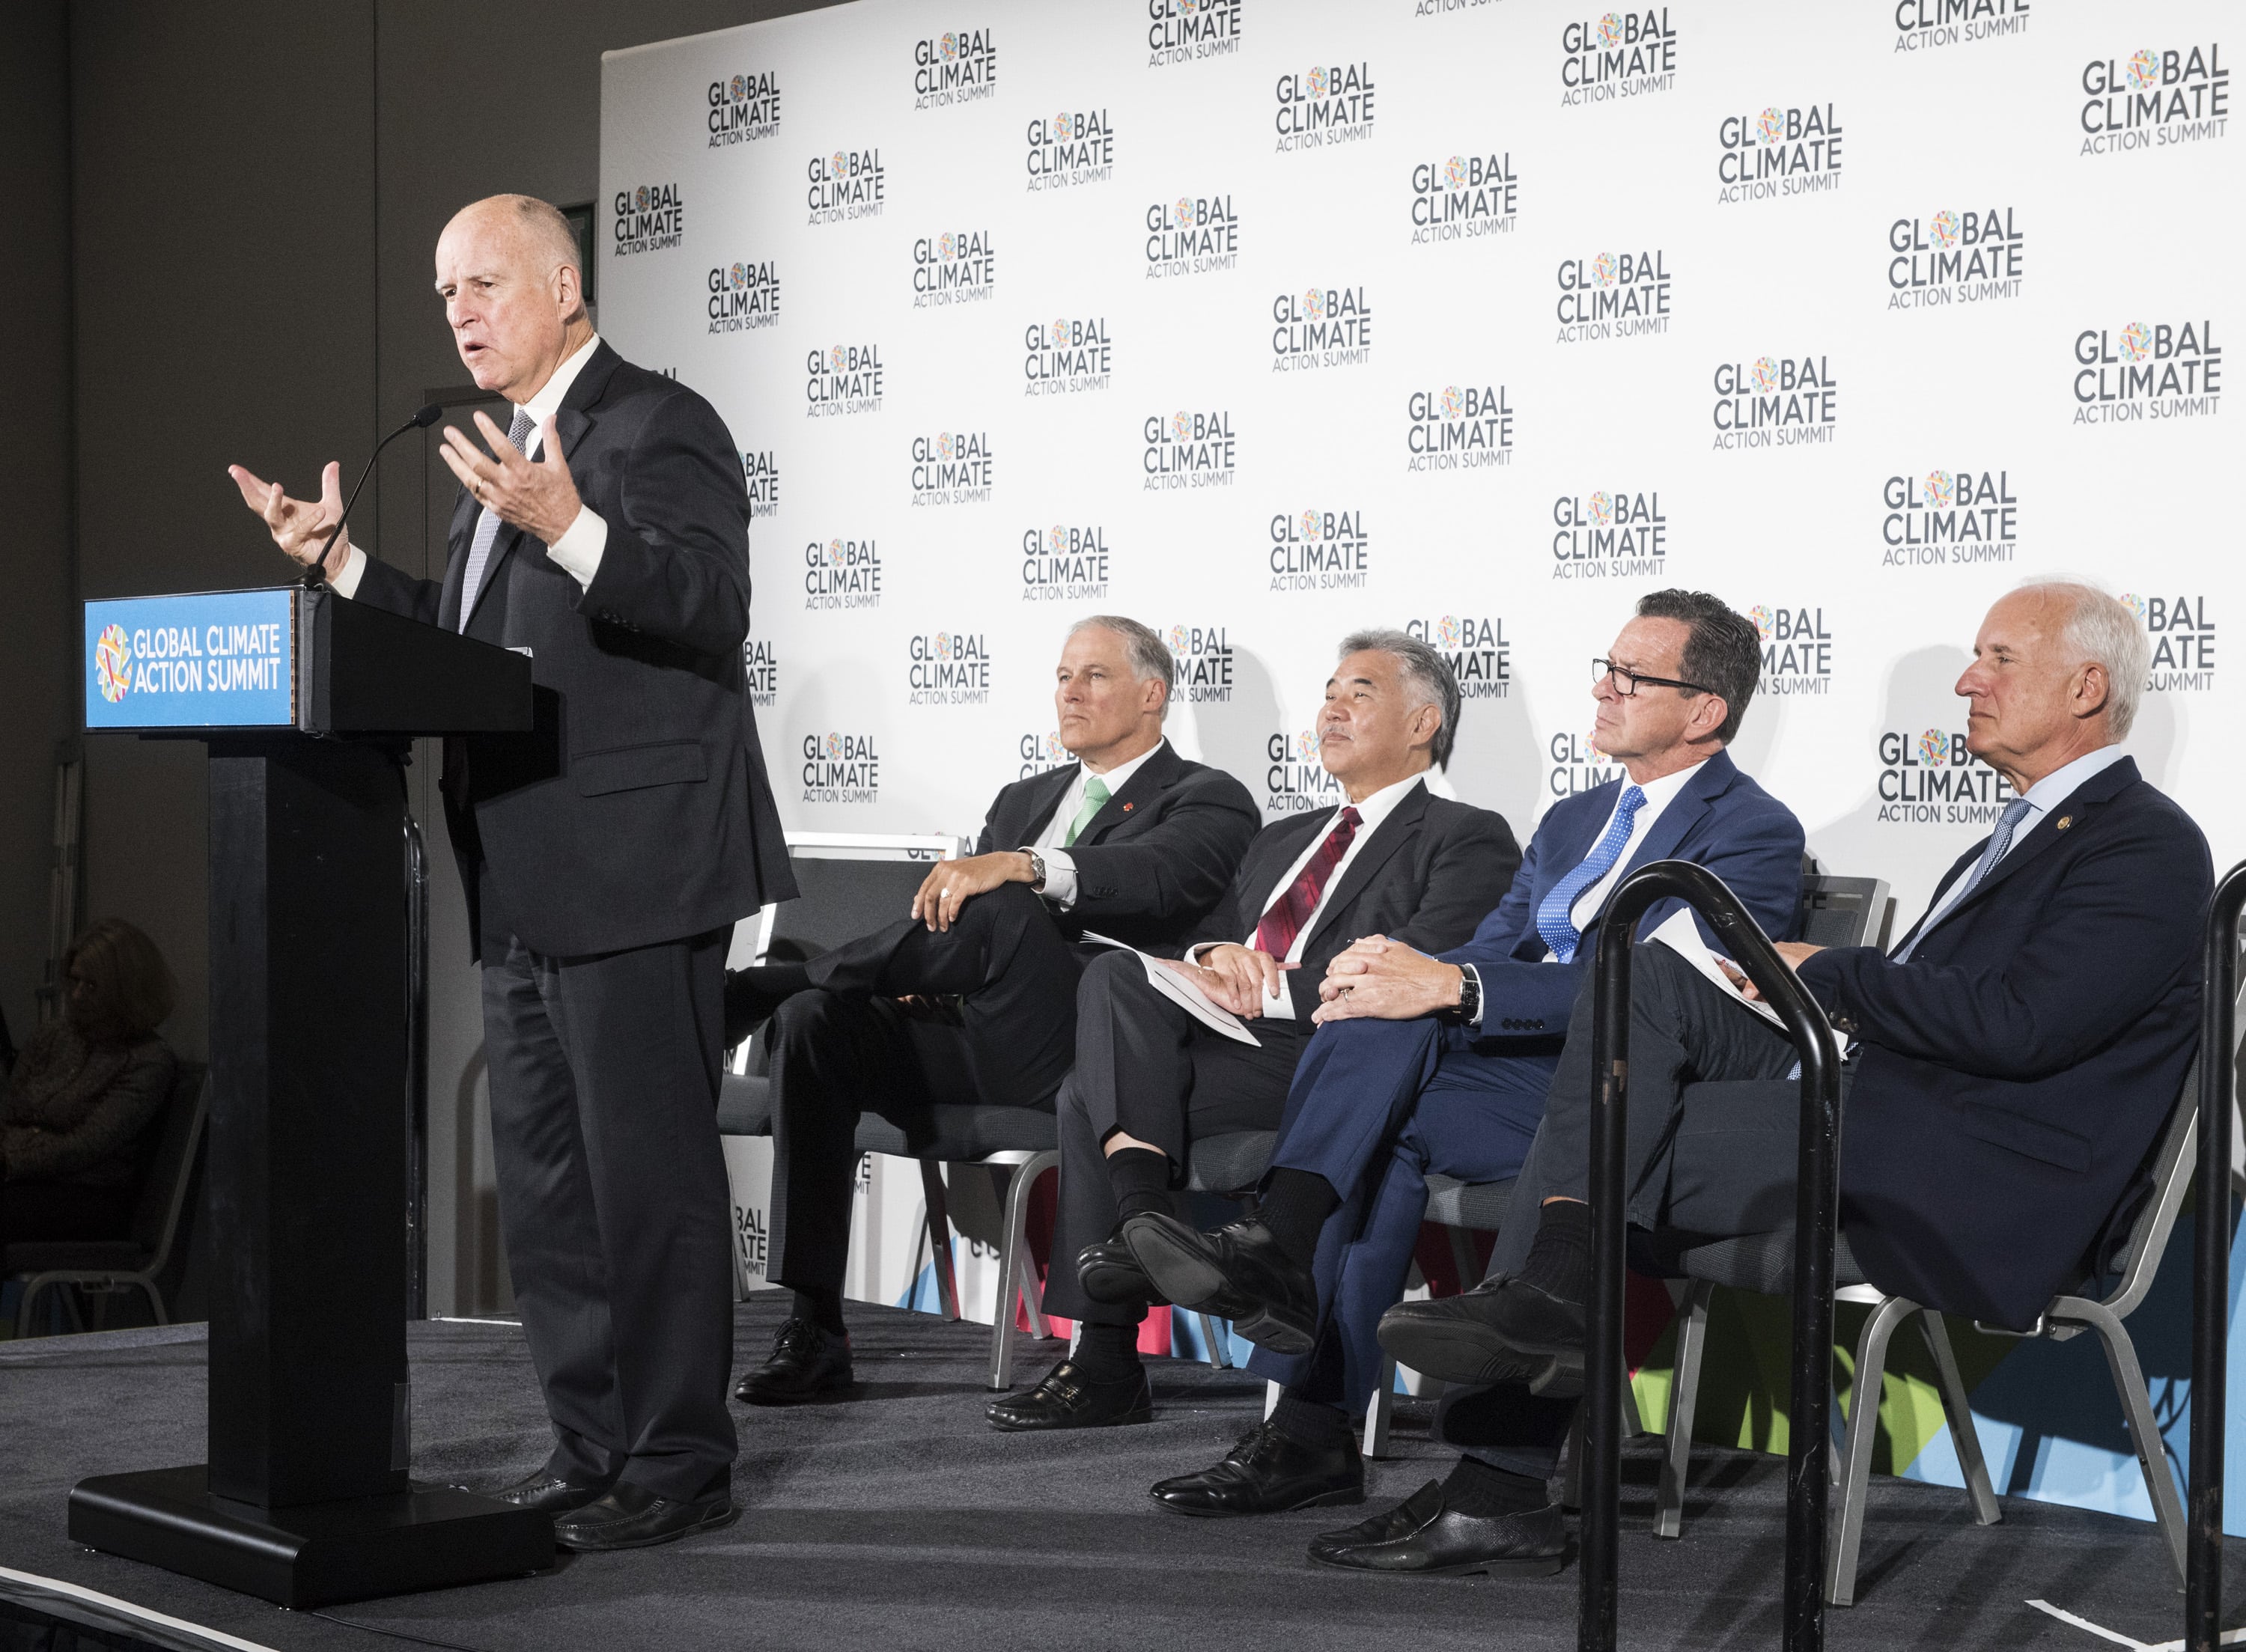 Governor Brown Reaffirms Commitment to Paris Agreement Goals with America’s Pledge Co-Founder Michael Bloomberg, U.S. Climate Alliance Governors